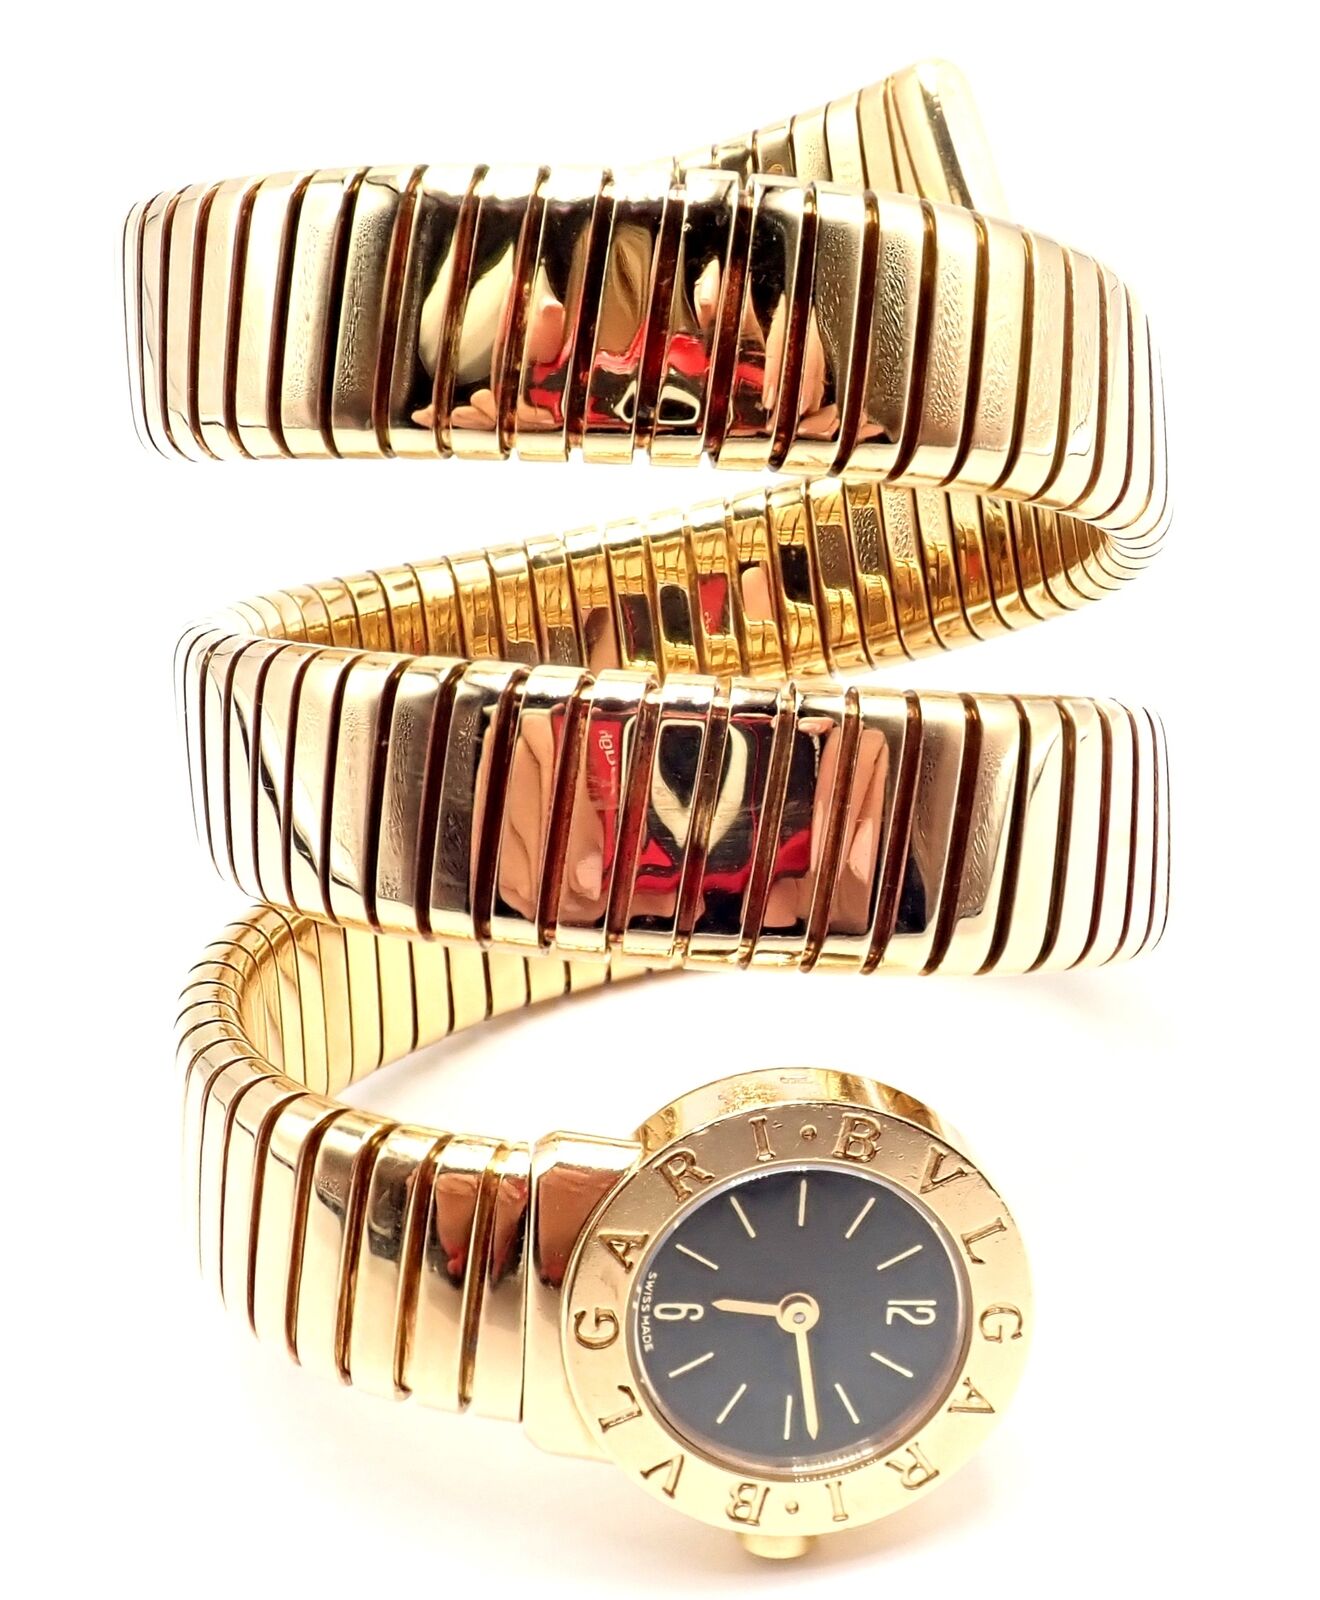 Bulgari Jewelry & Watches:Watches, Parts & Accessories:Watches:Wristwatches Authentic! Bulgari 18k Yellow Gold Tubogas Serpent Snake Bracelet Watch